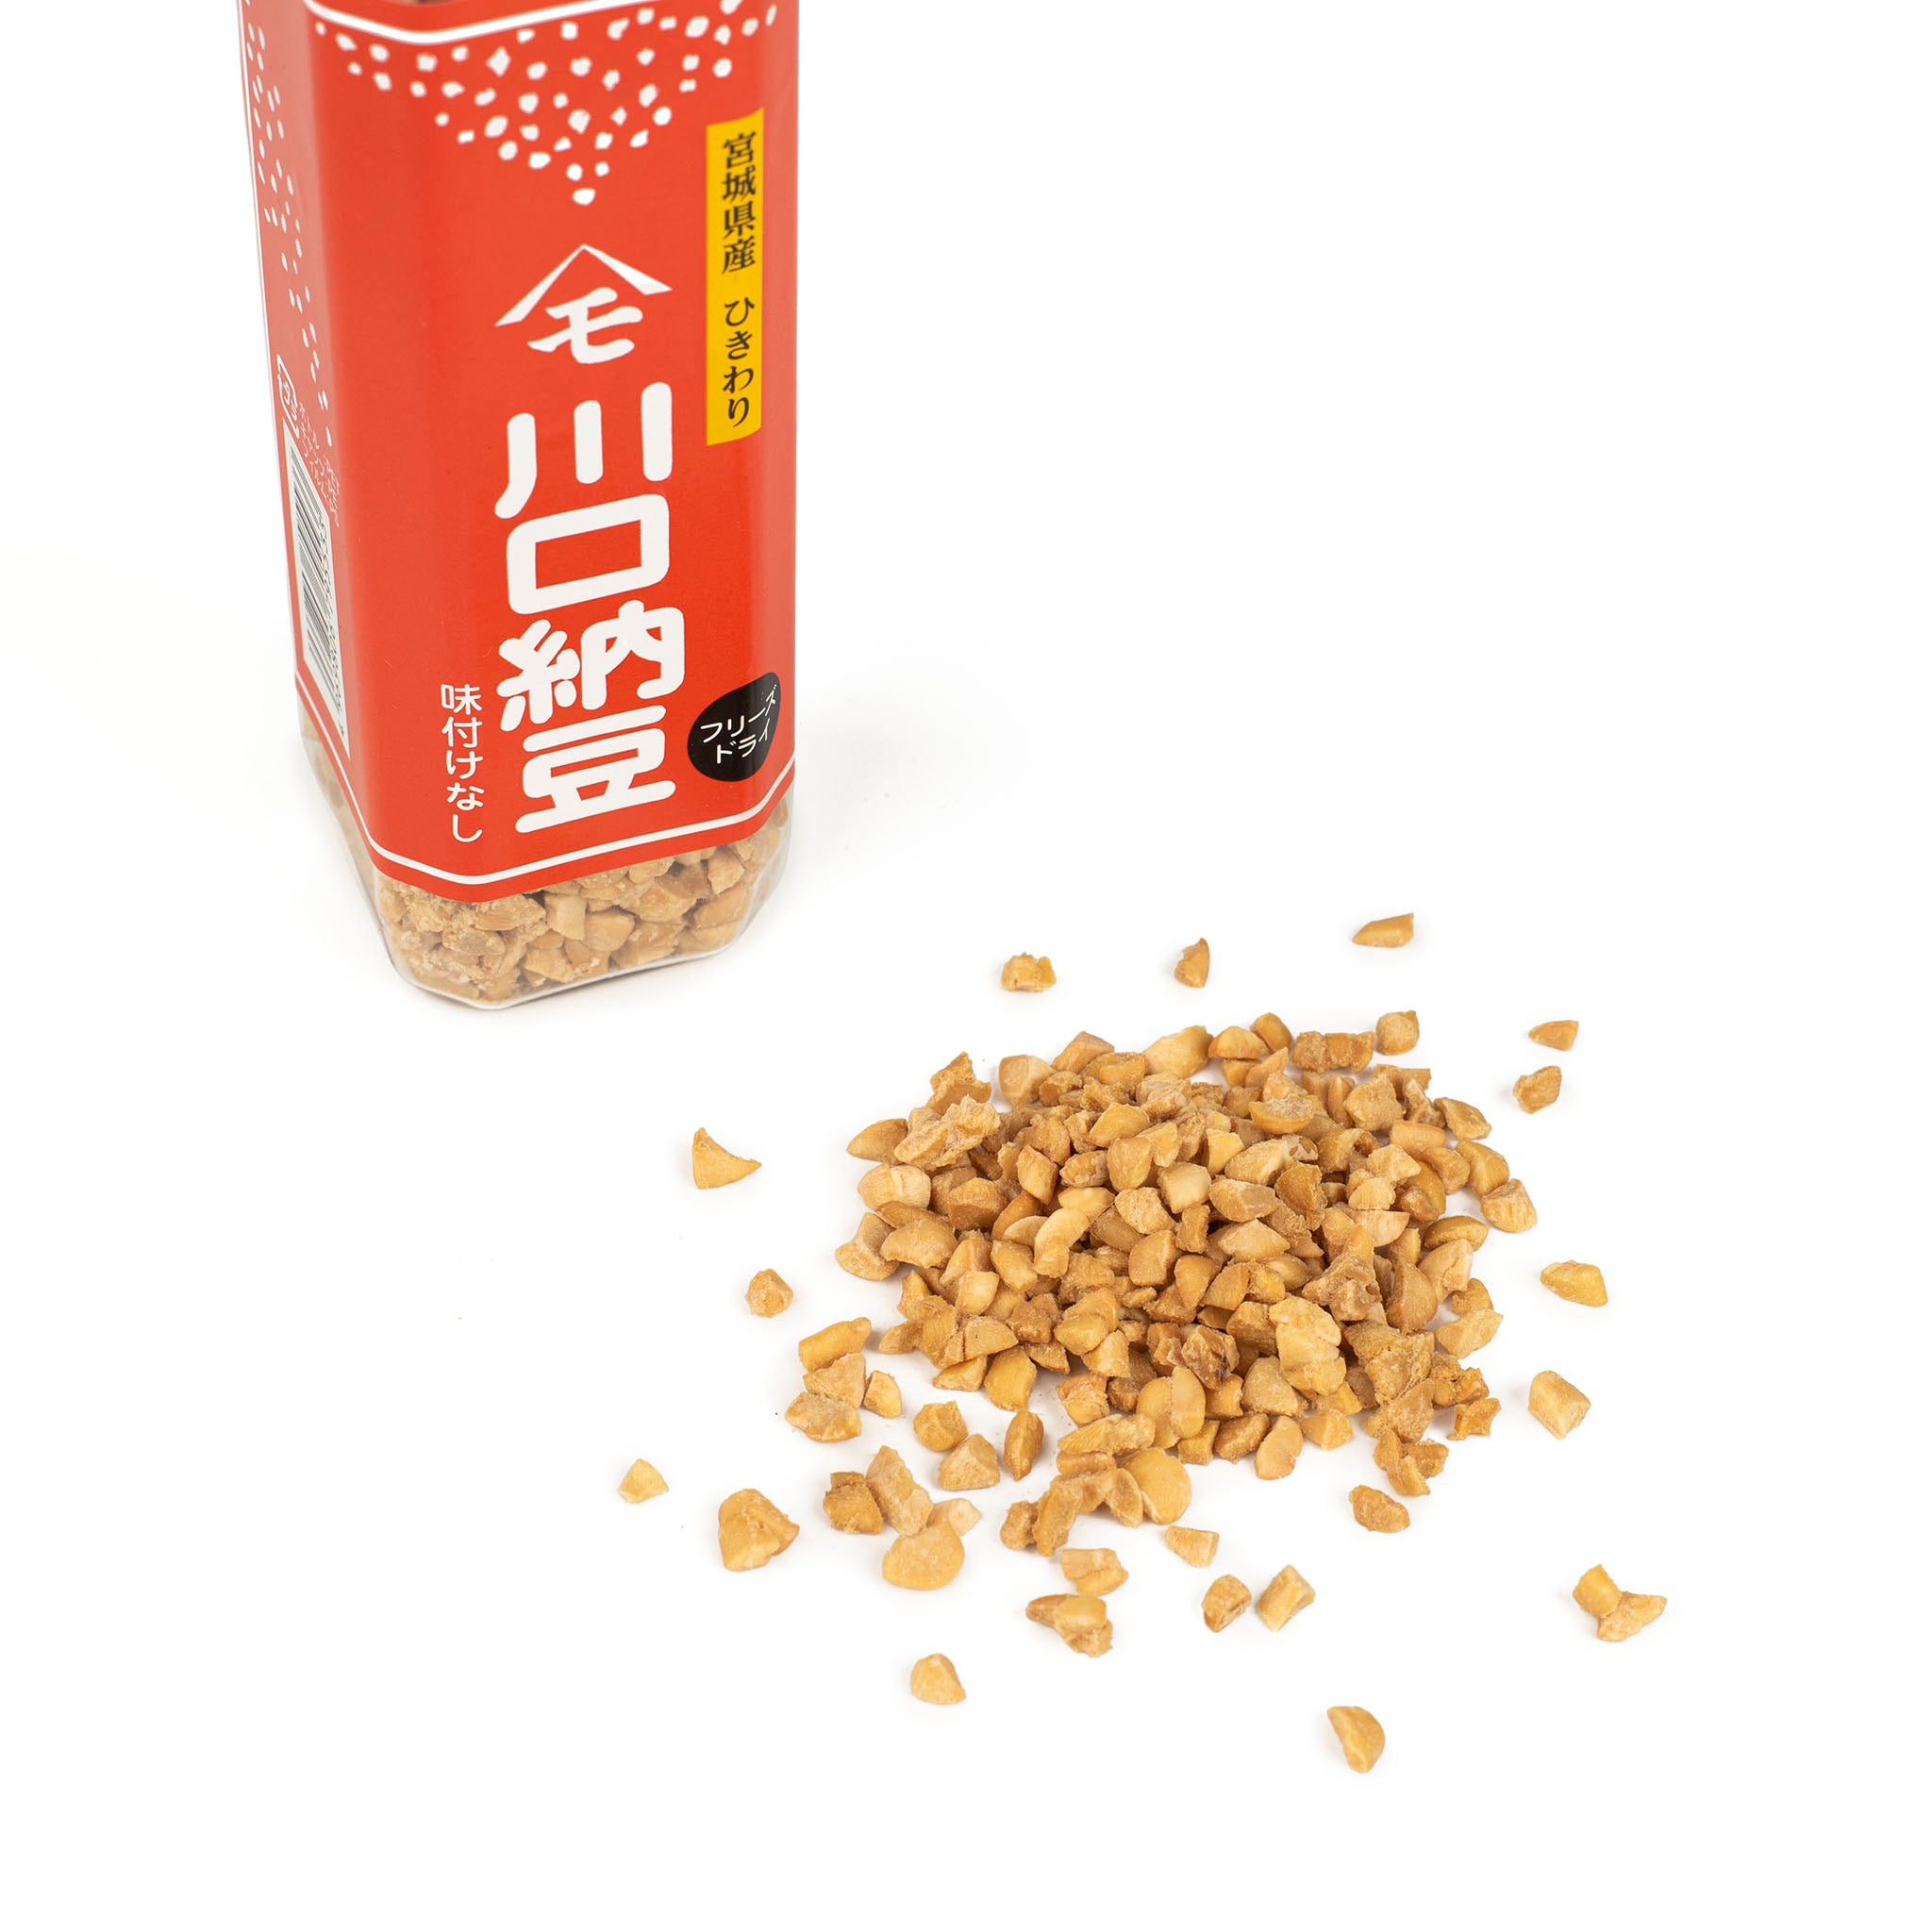 dried natto and a package bottle